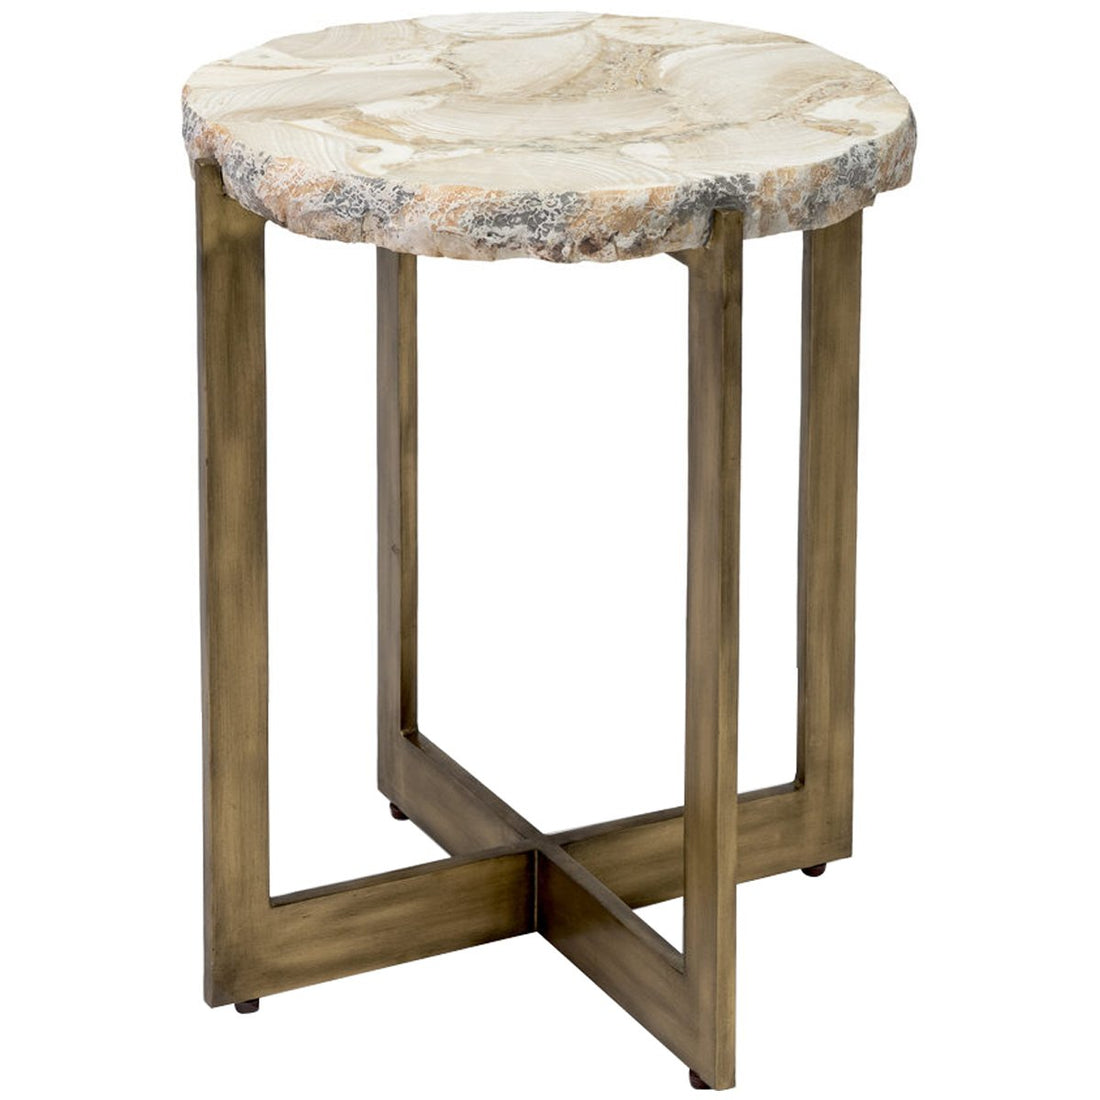 Palecek Durham Fossilized Clam Side Table